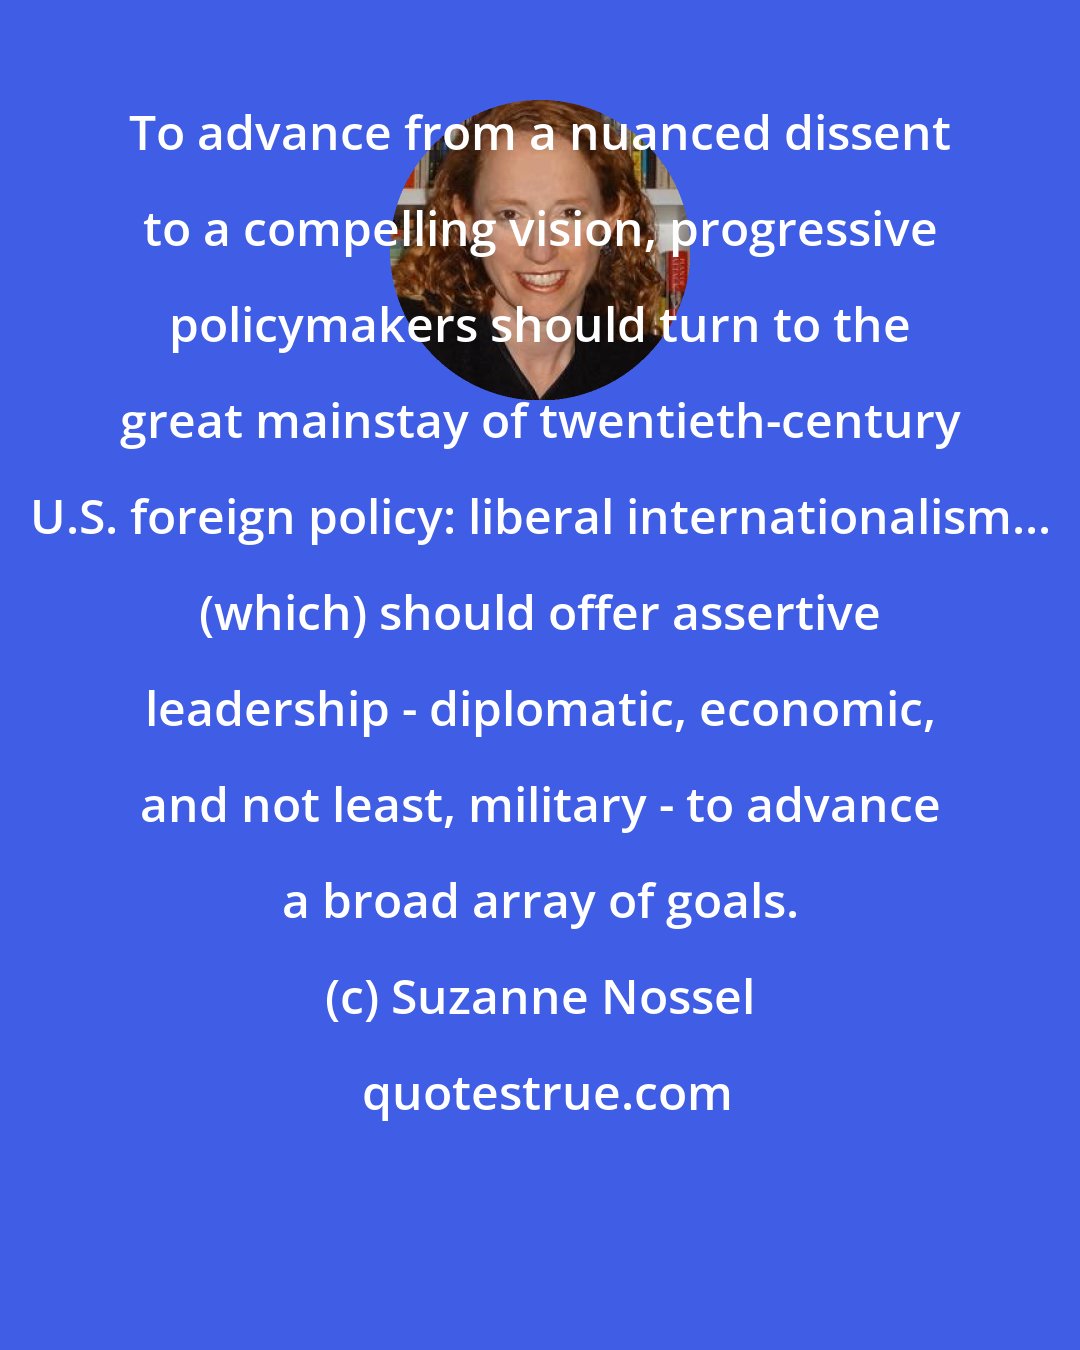 Suzanne Nossel: To advance from a nuanced dissent to a compelling vision, progressive policymakers should turn to the great mainstay of twentieth-century U.S. foreign policy: liberal internationalism... (which) should offer assertive leadership - diplomatic, economic, and not least, military - to advance a broad array of goals.